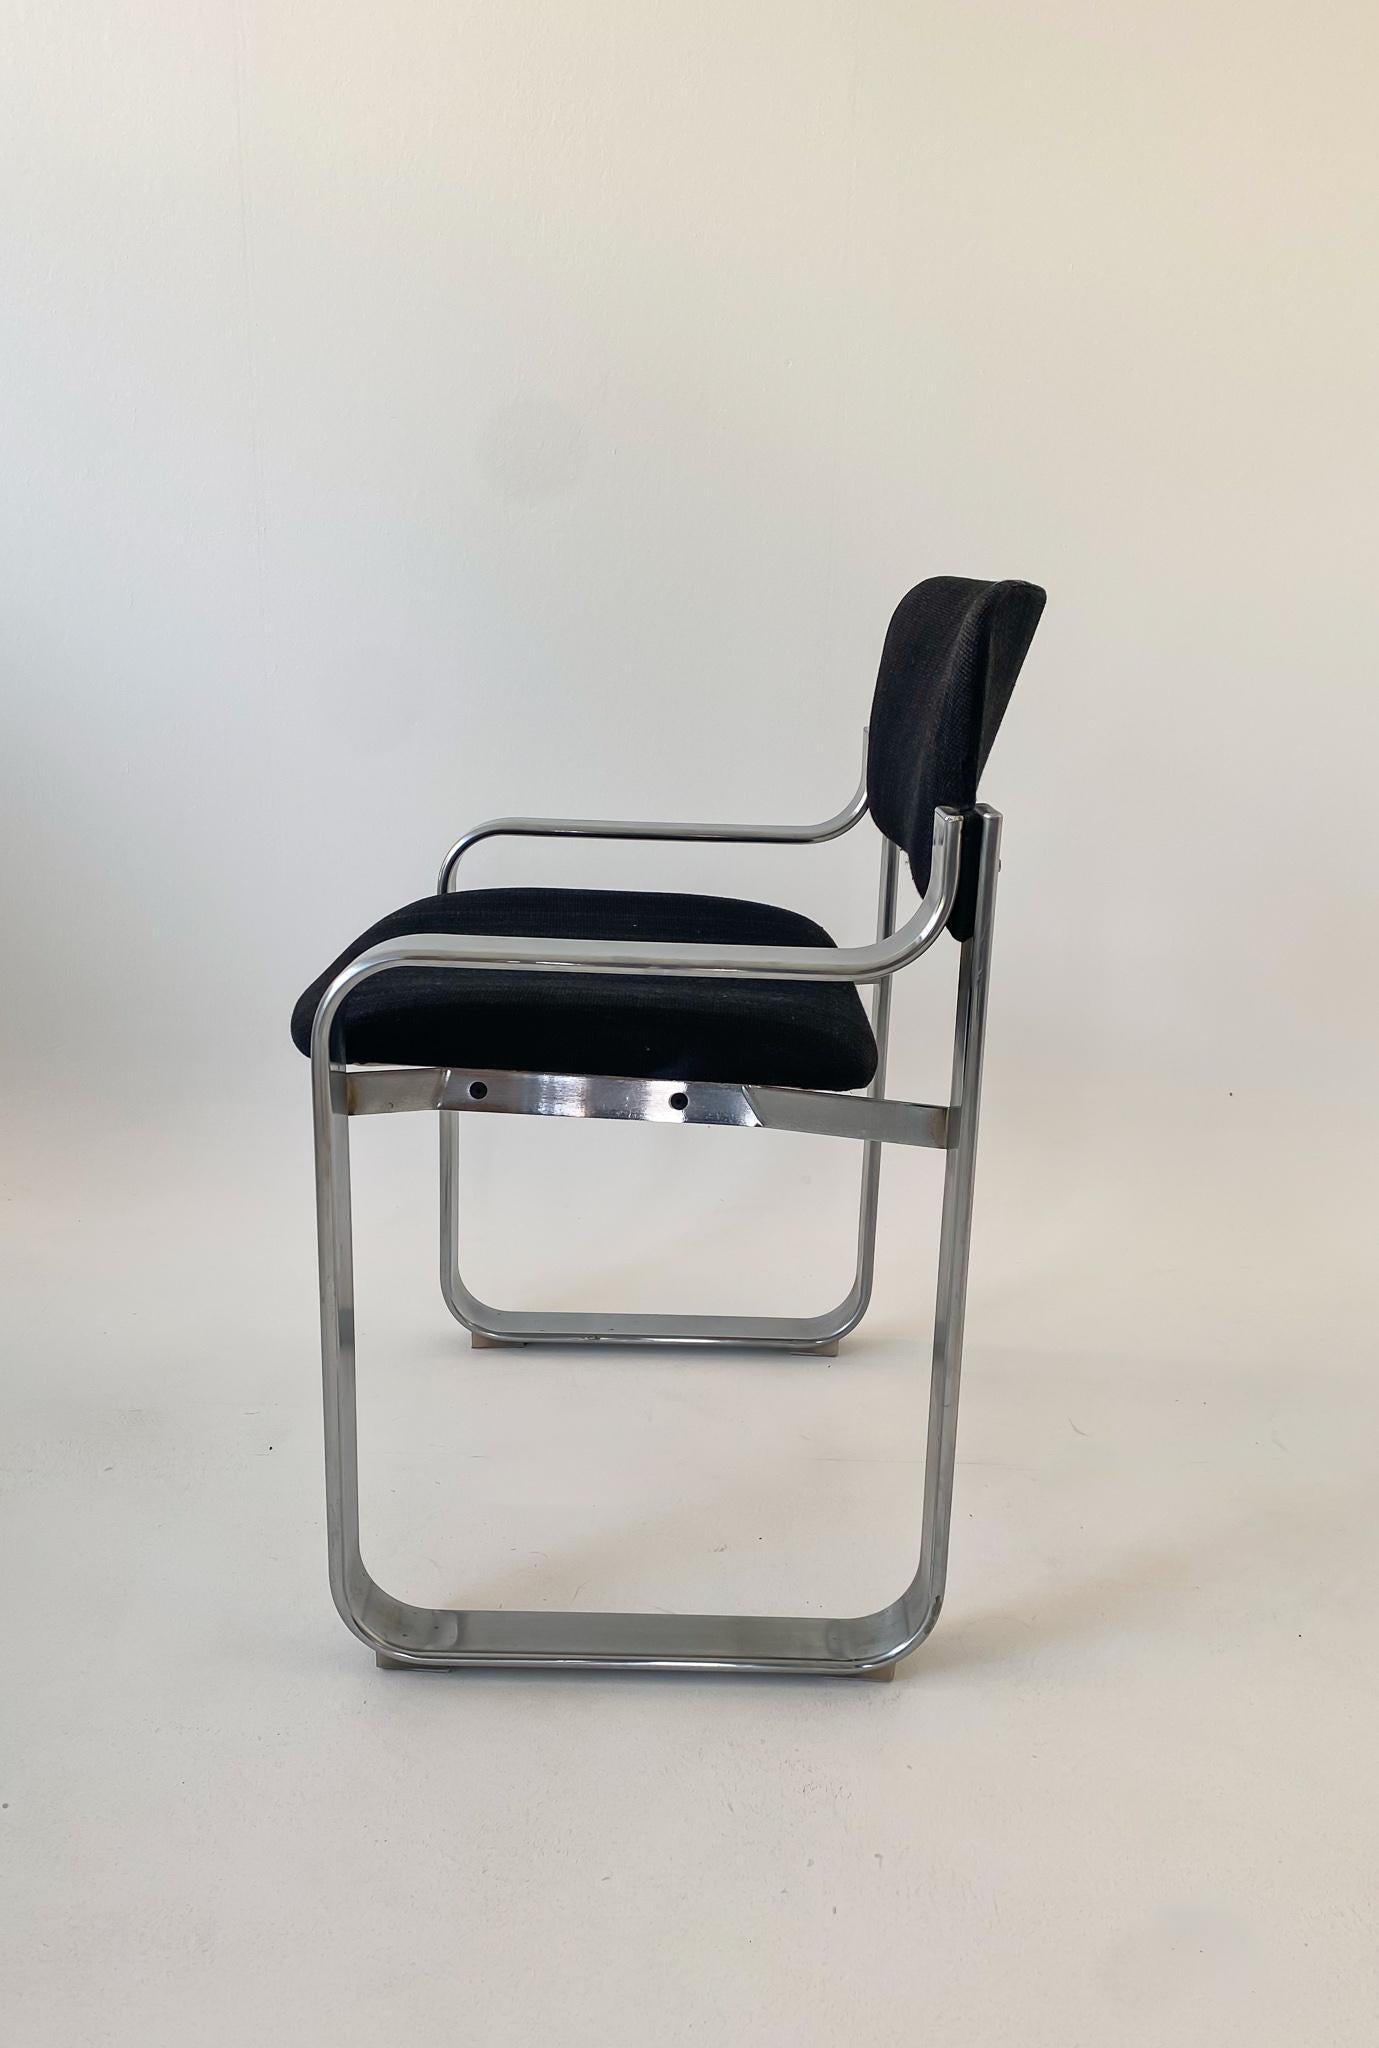 Mid-Century Modern Black Metal Armchair by Eero Aarnio for Mobile Italia, 1970s For Sale 1